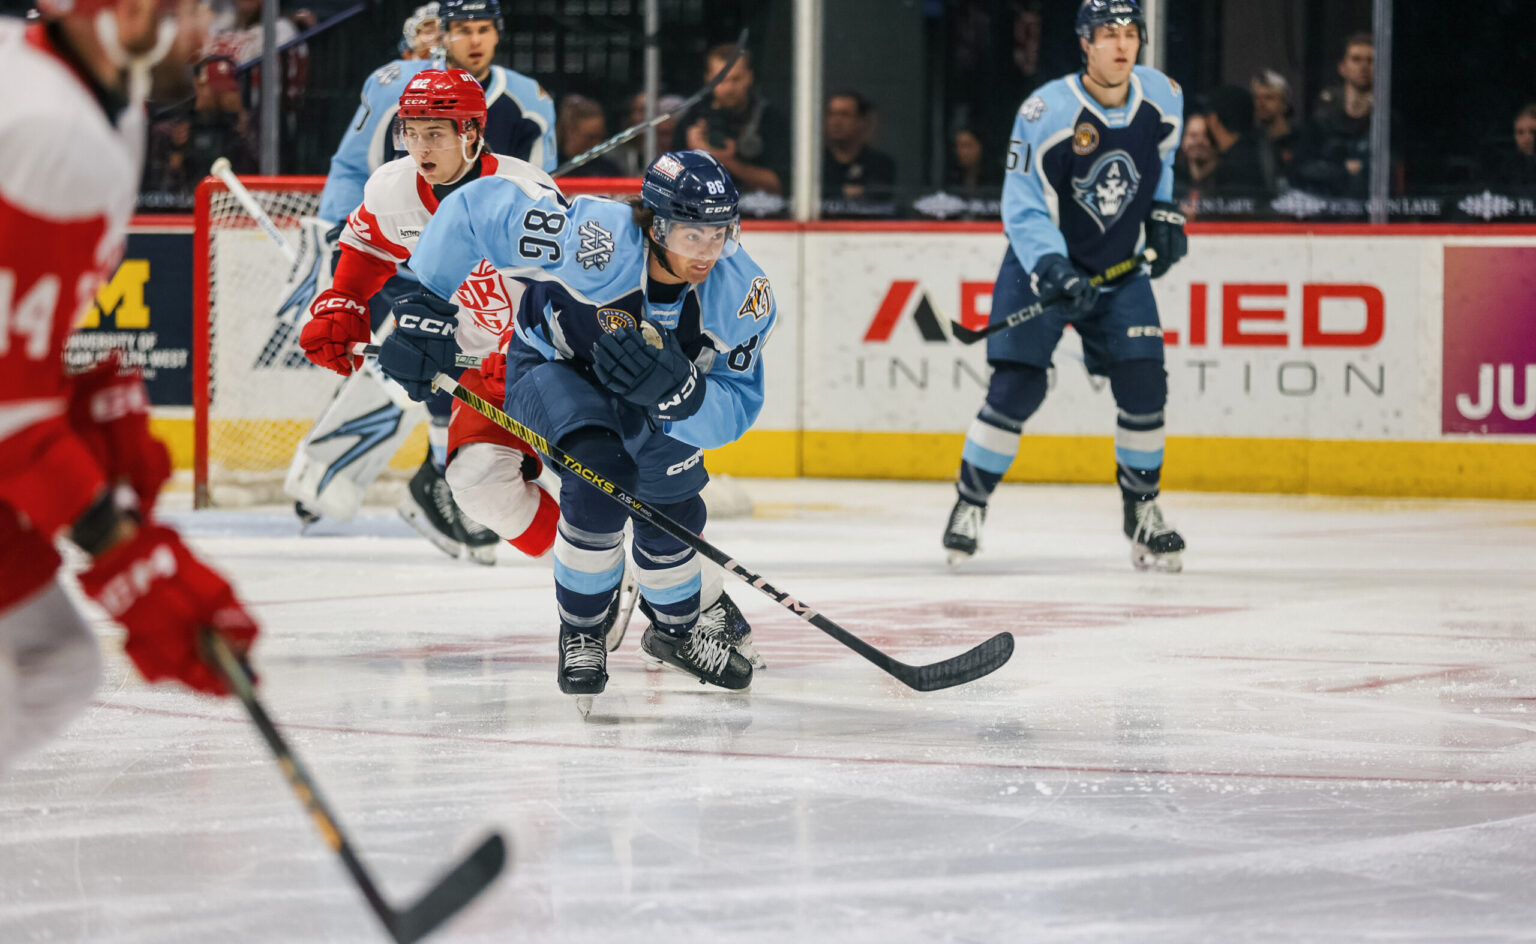 Ads Face Stars in Division Semifinals - Milwaukee Admirals